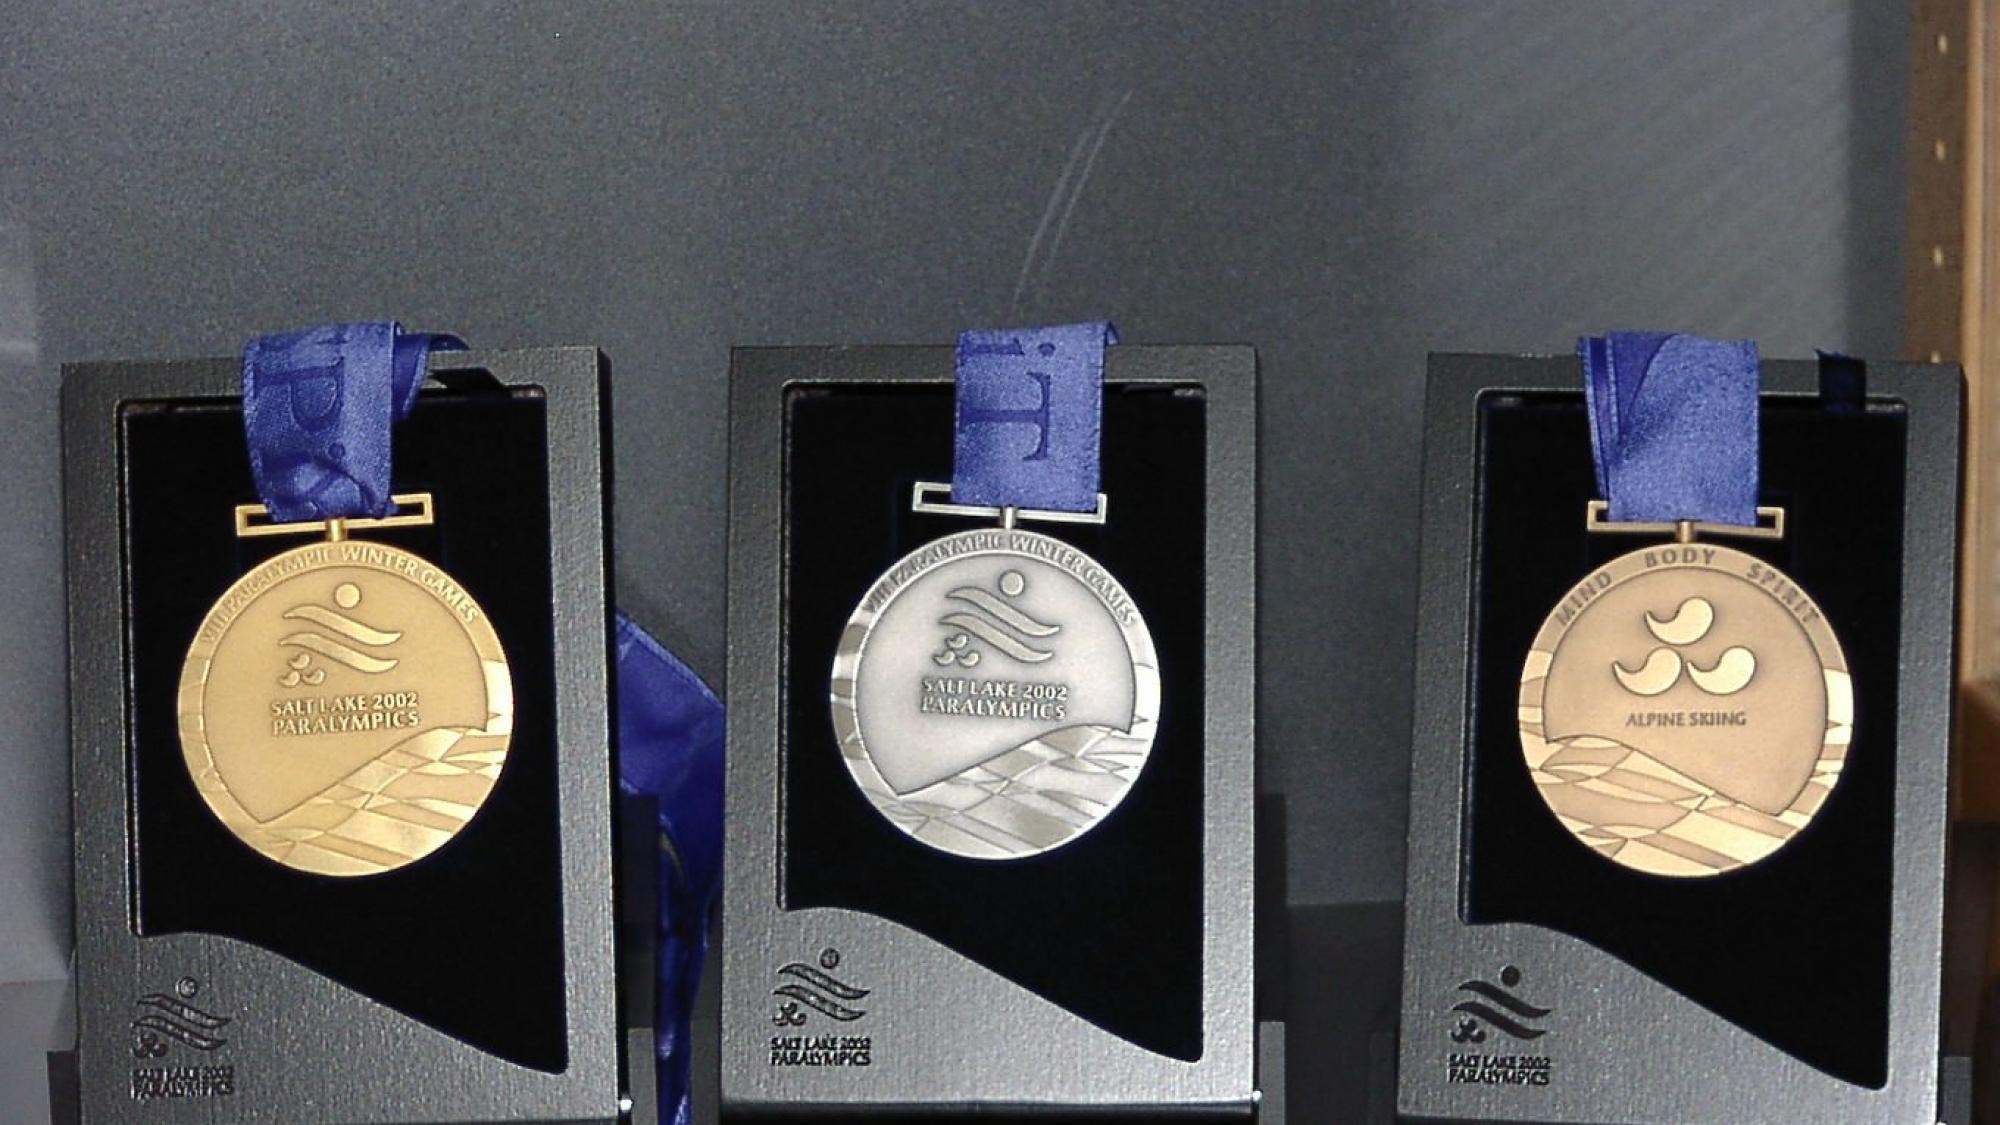 The medals of the Salt Lake City 2002 Paralympic Winter Games